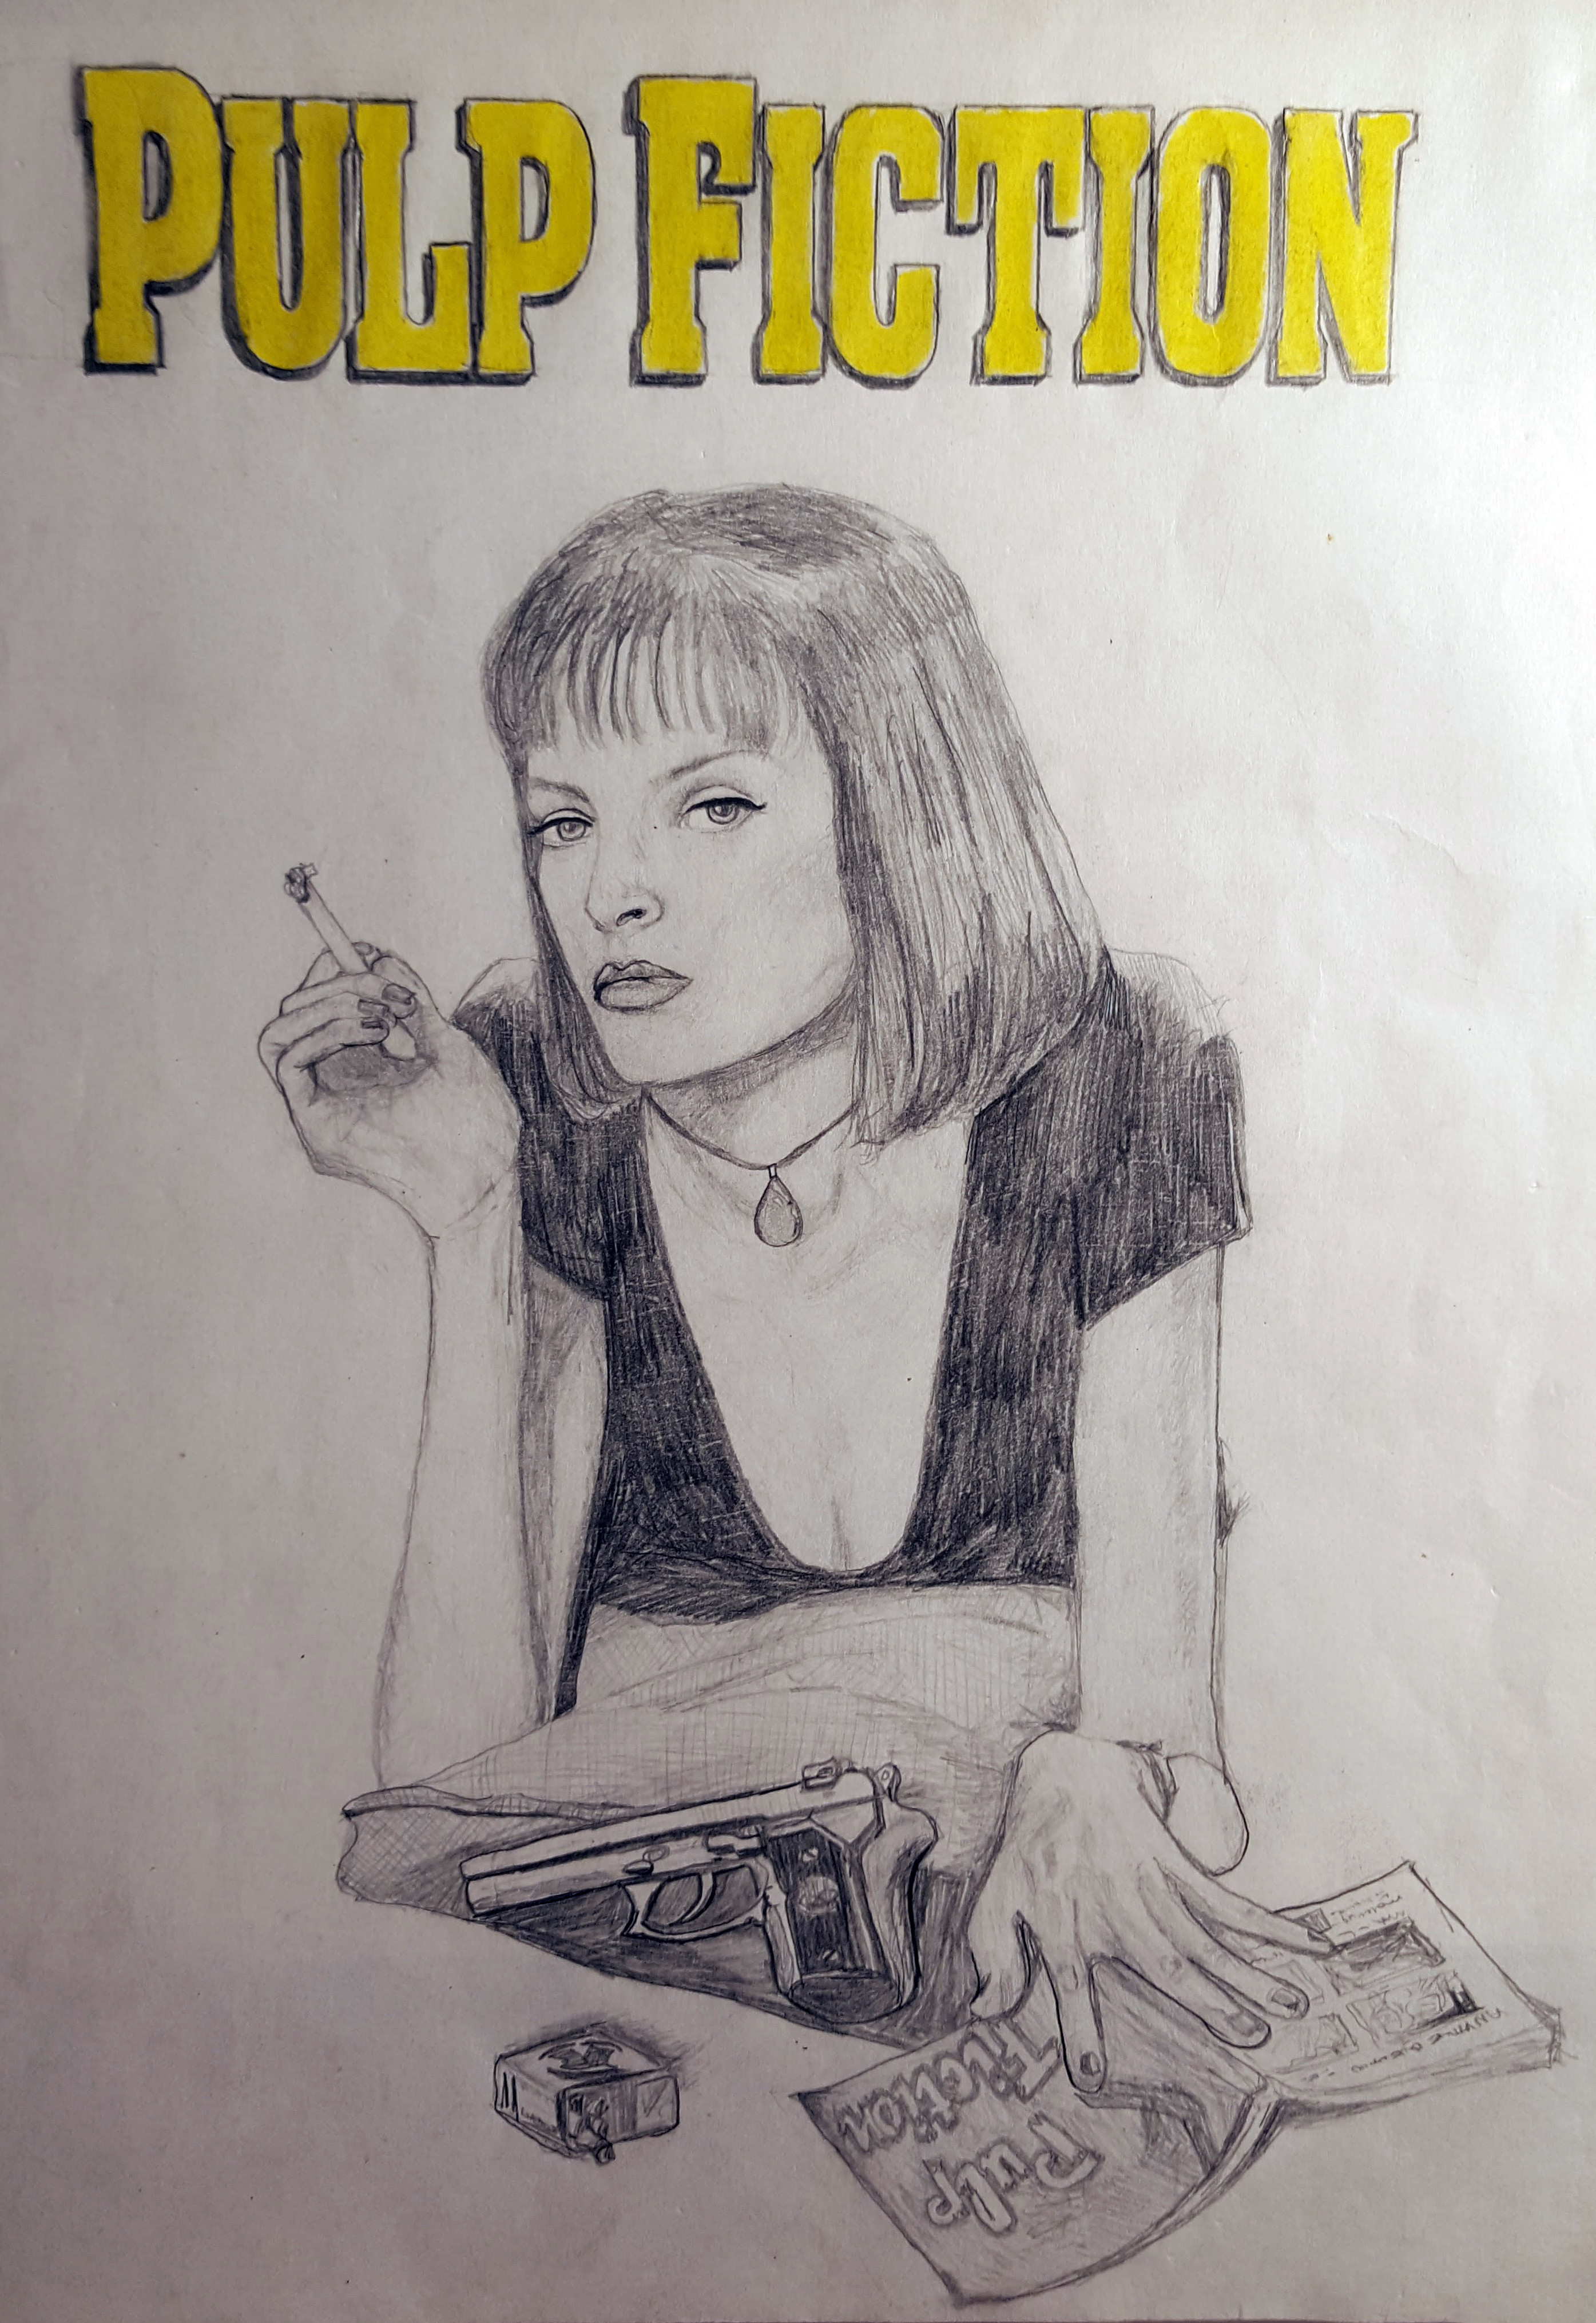 Pulp Fiction poster.